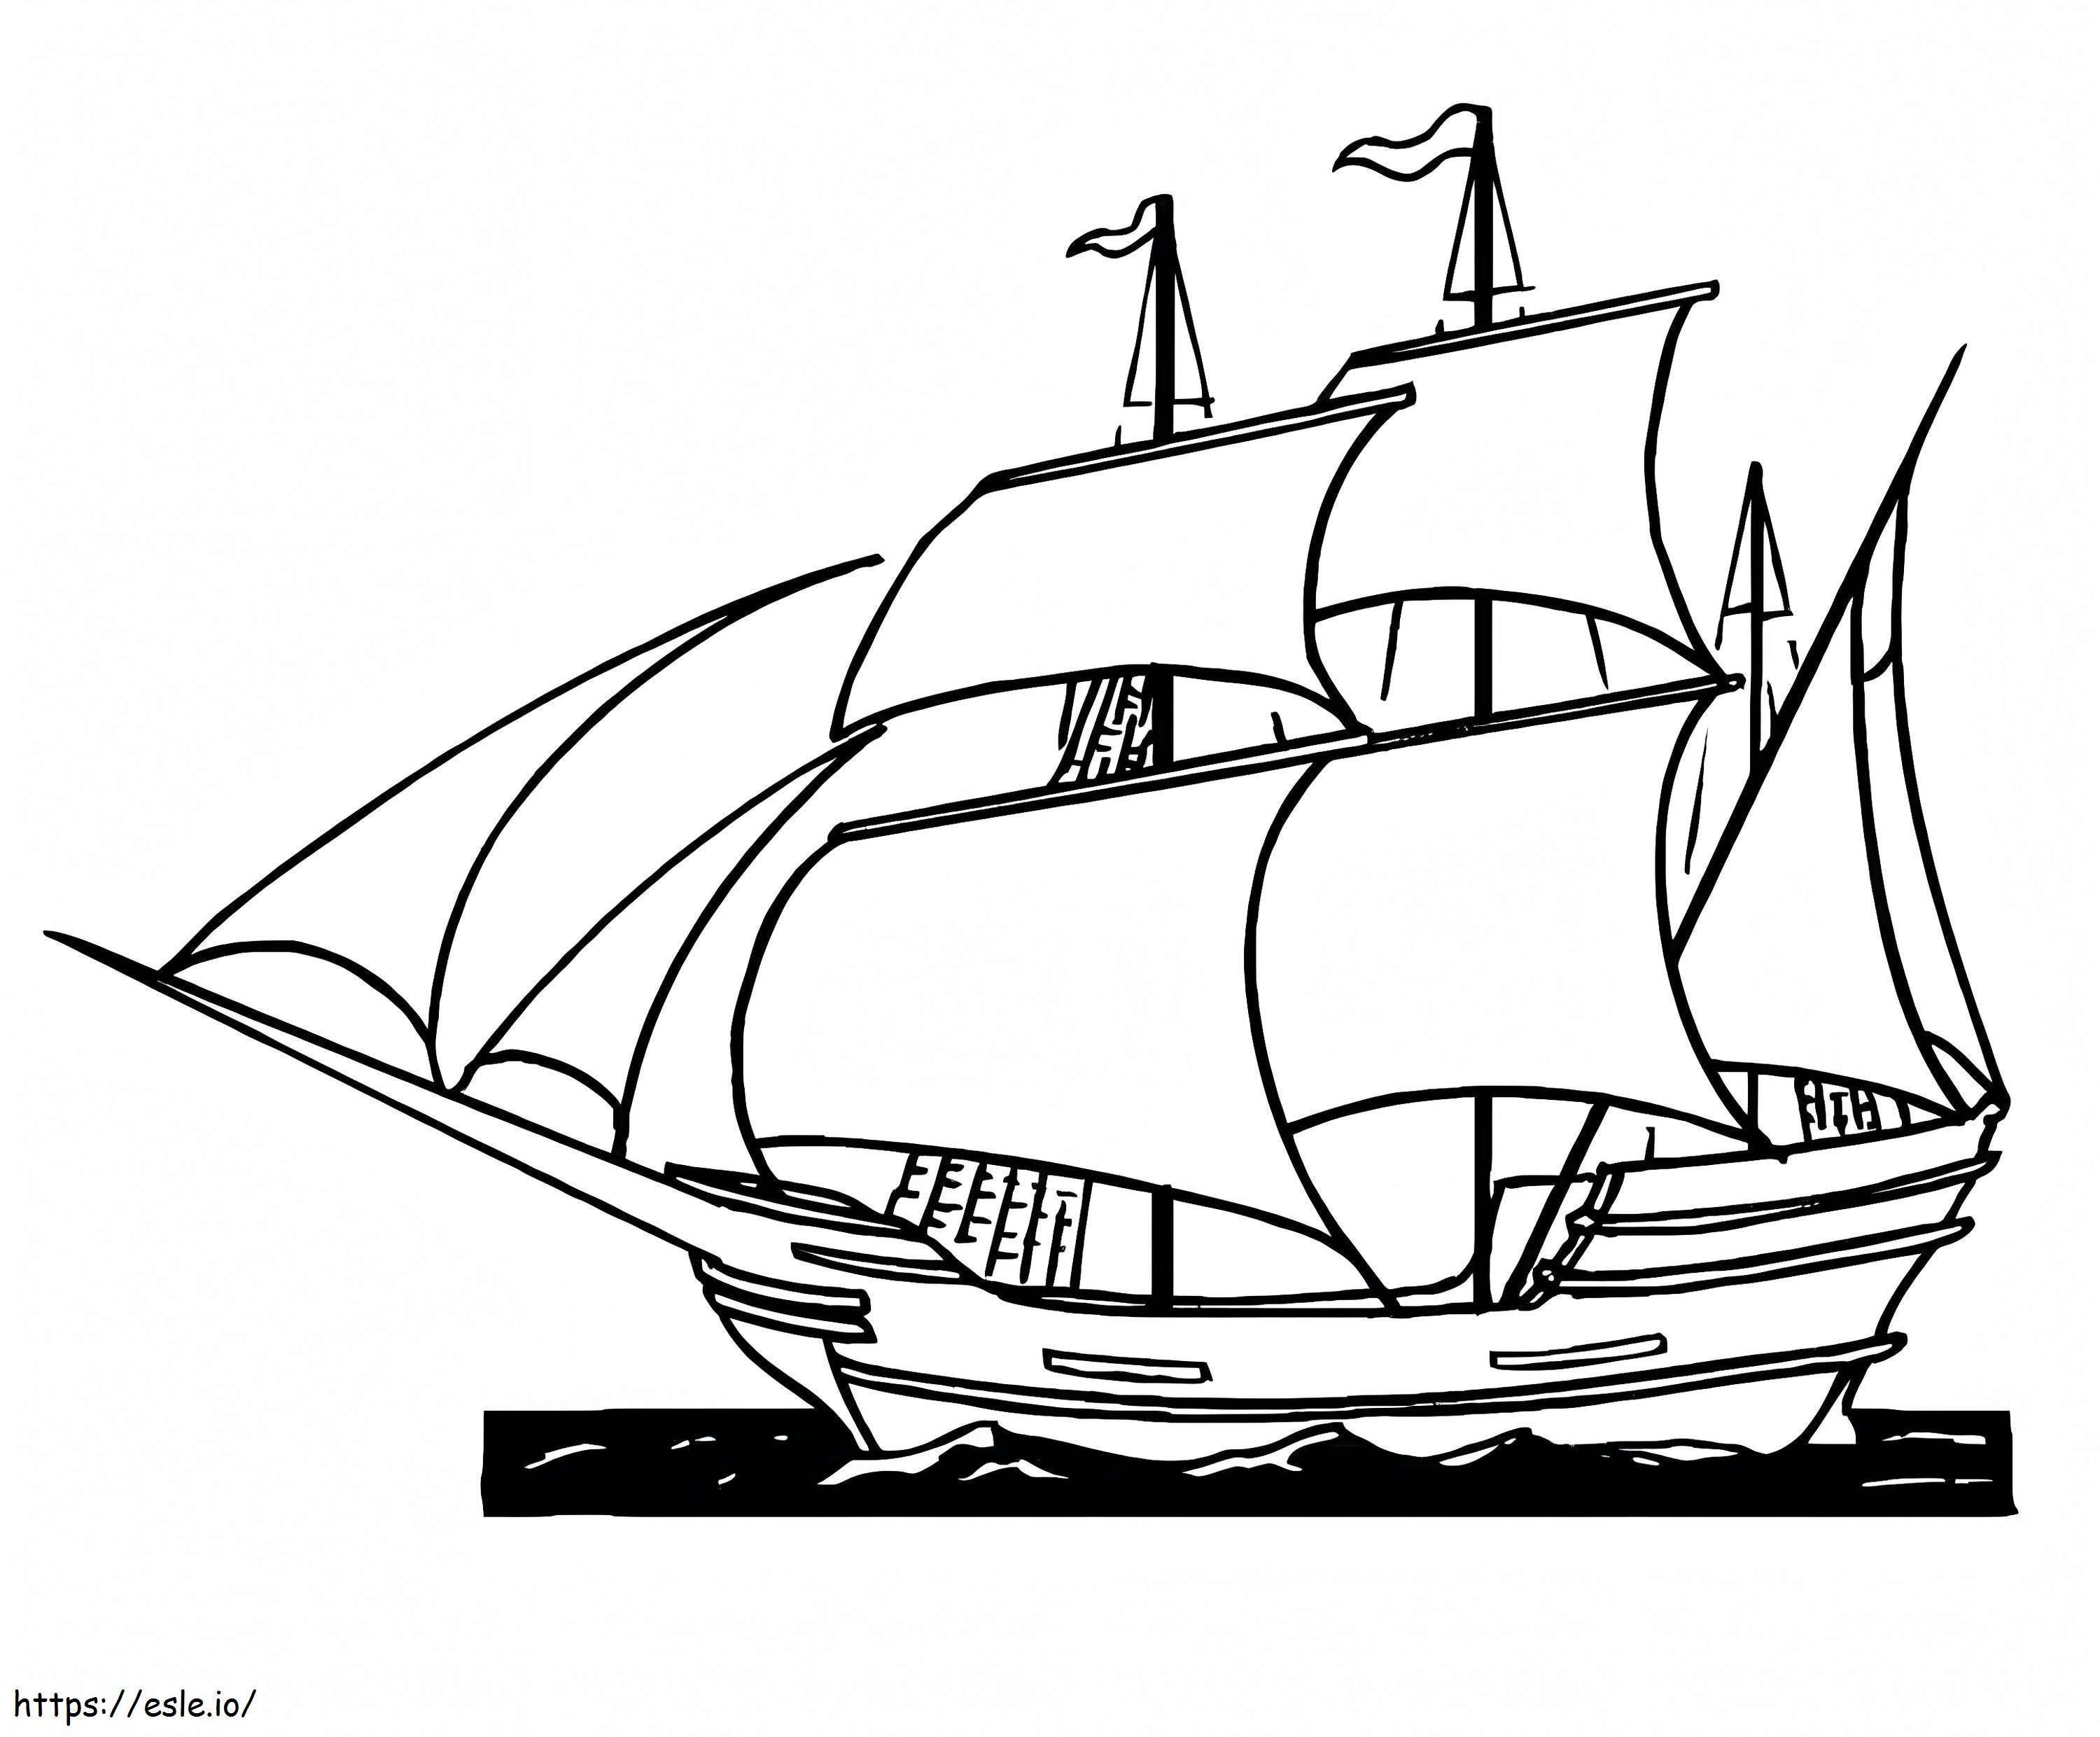 The Mayflower 1 coloring page